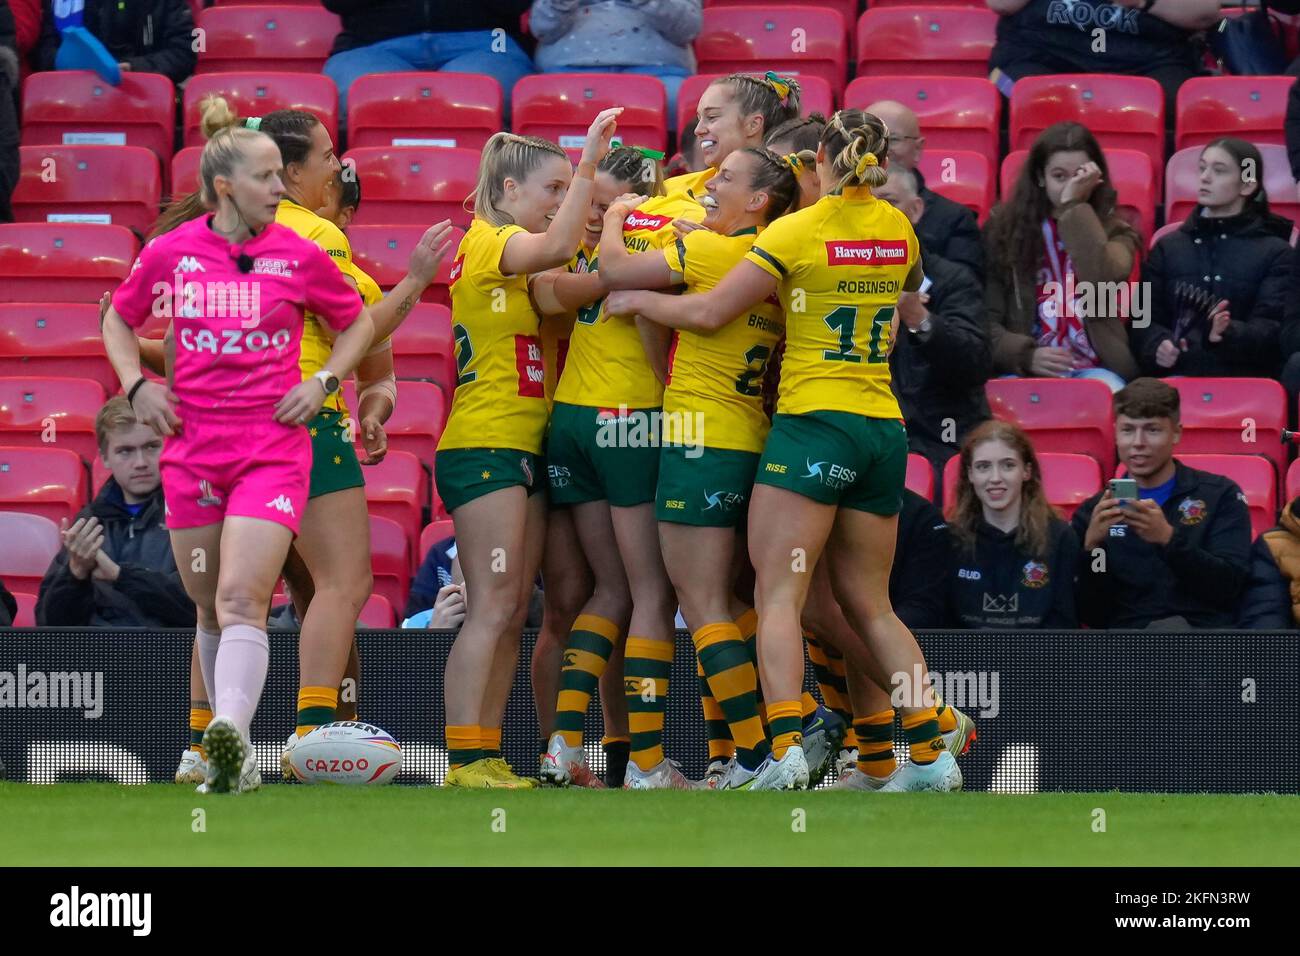 Manchester, UK. 18th Nov, 2022. Jessica Sergis of Australia (11) celebrates with team mates after she scores the opening try during the 2021 Women's Rugby League World Cup Final match between Australia and New Zealand at Old Trafford, Manchester, England on 19 November 2022. Photo by David Horn. Credit: PRiME Media Images/Alamy Live News Stock Photo